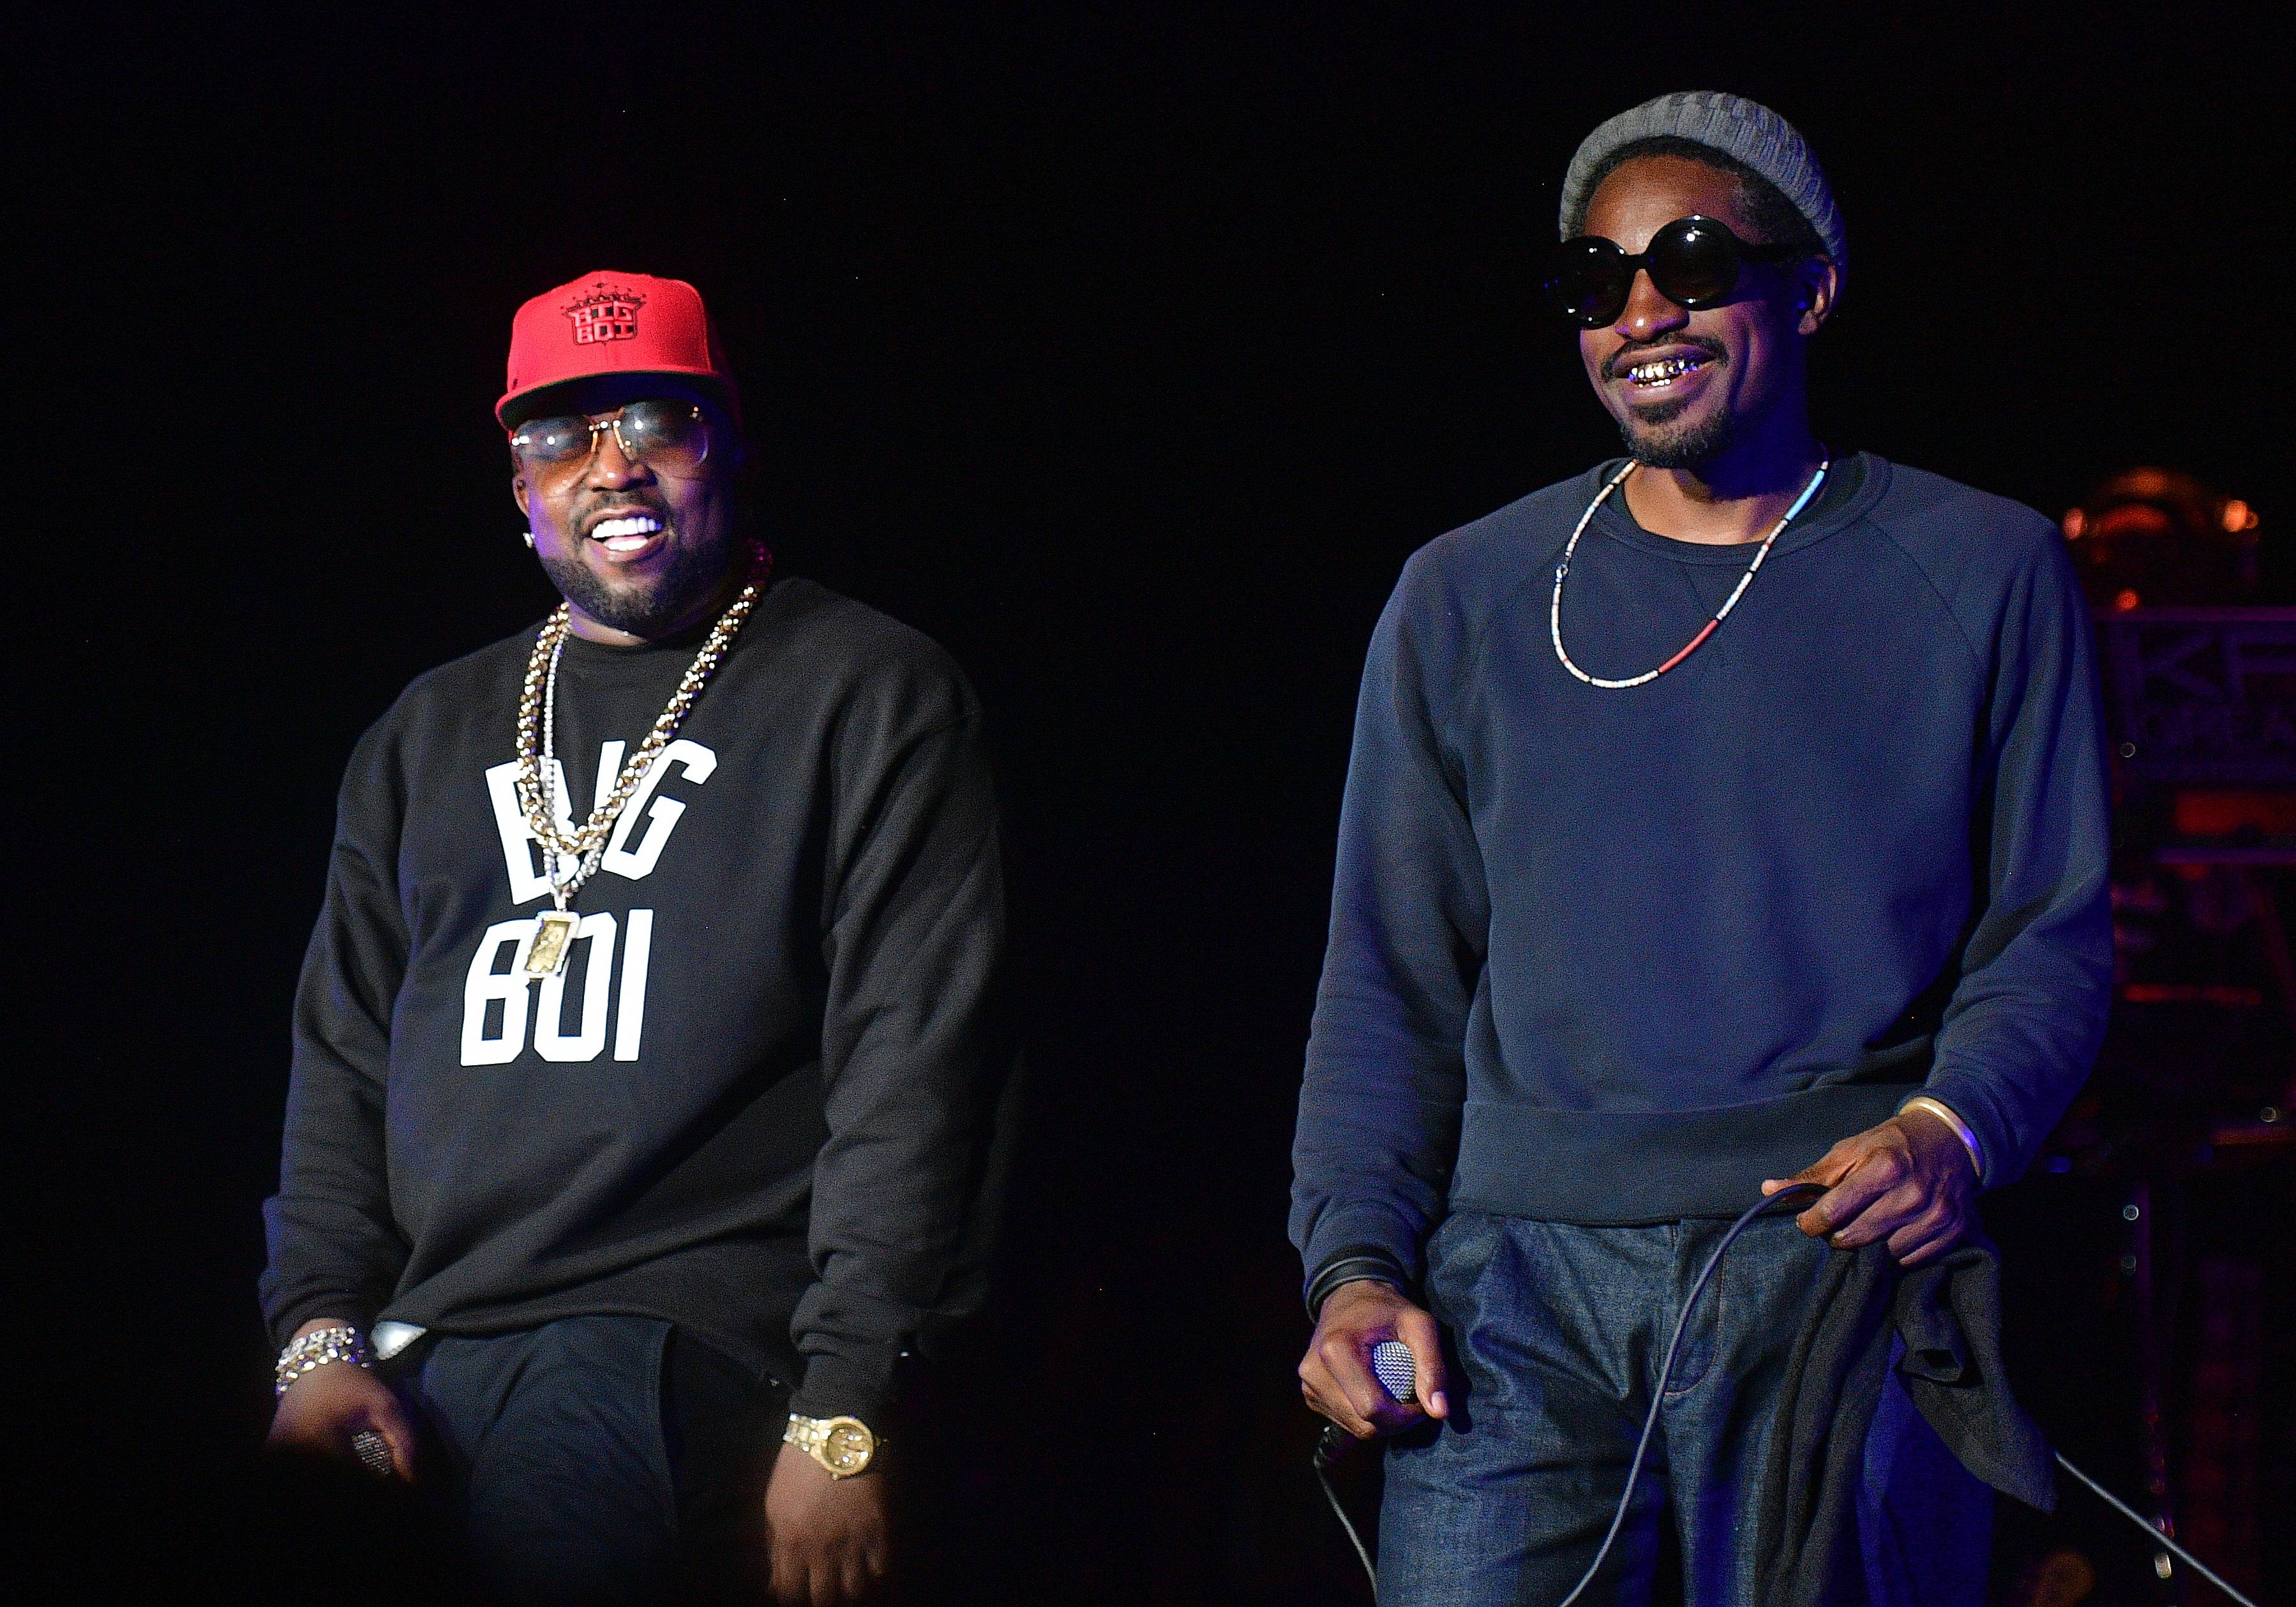 ATLANTA, GA - SEPTEMBER 10:  Big Boi and Andre 3000 of Outkast perform at One MusicFest at Lakewood Amphitheatre on September 10, 2016 in Atlanta, Georgia.  (Photo by Prince Williams/WireImage)